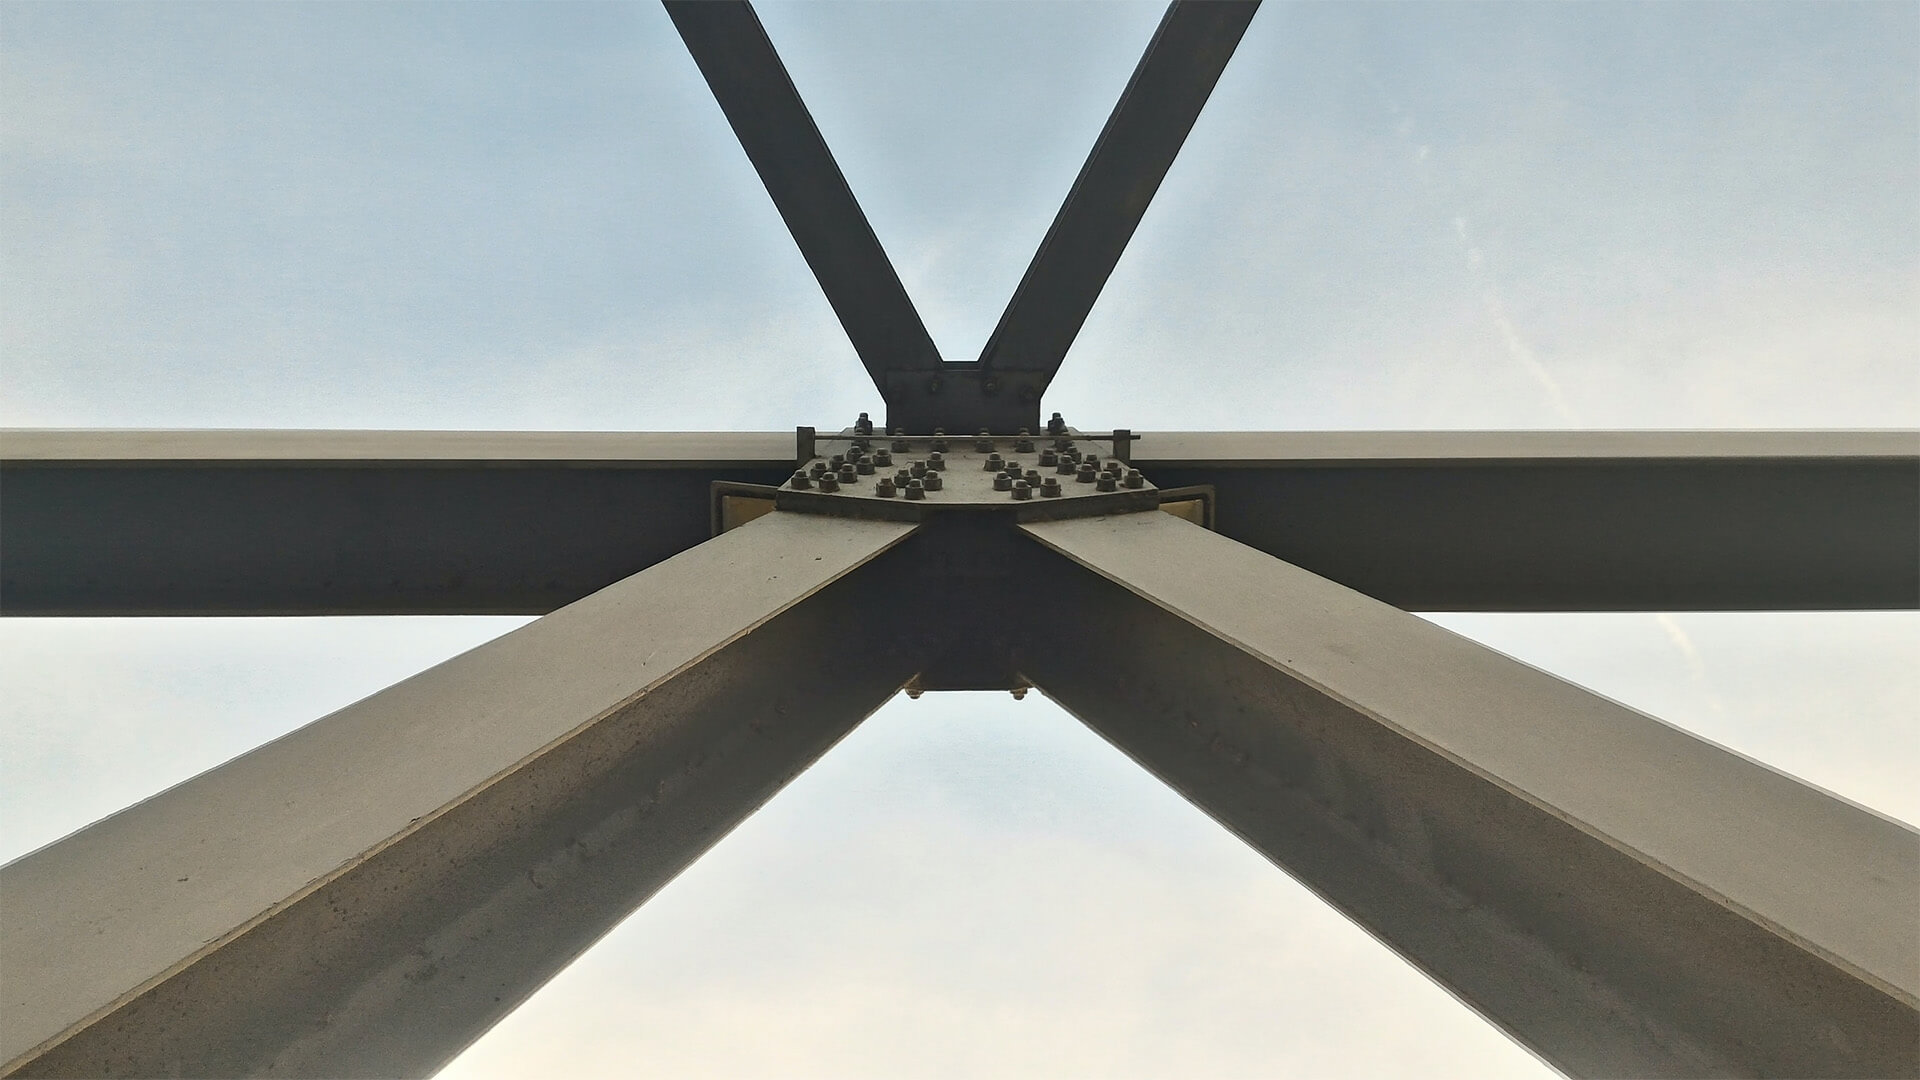 An image of several large iron beams converging outside. A visual metaphor for the topic of this article, Lawyers and project managers